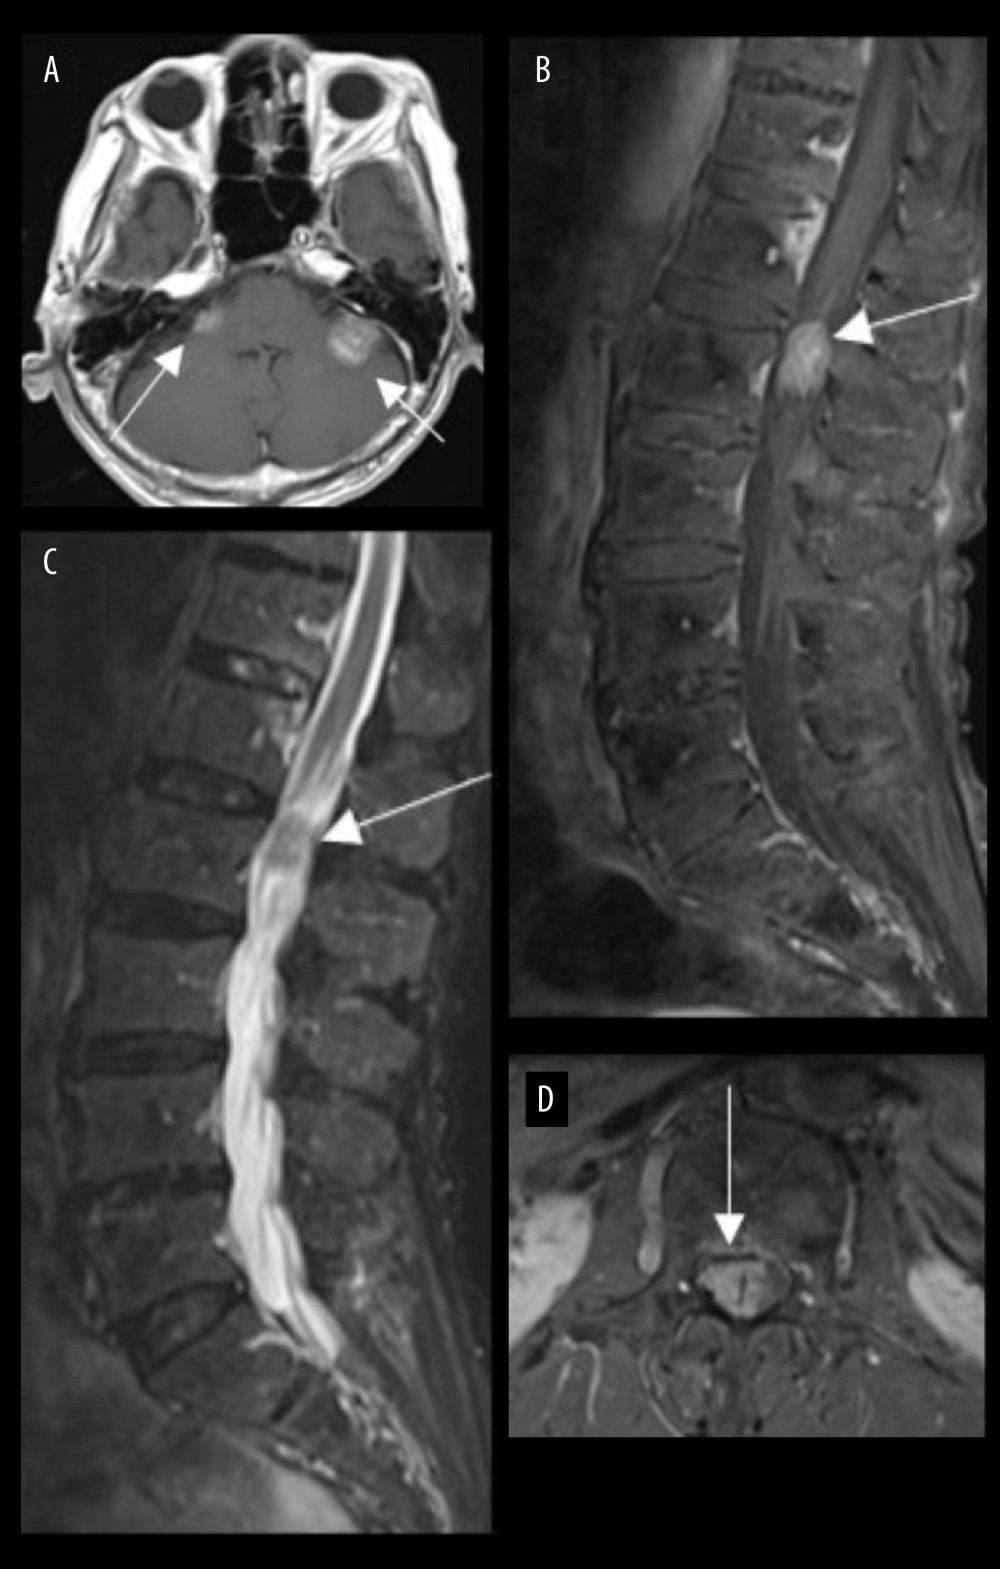 Six-month follow-up MRI brain and lumbar spine scans of an 82-year-old man after debulking of an extradural tumor. (A) Axial T1W post-contrast MRI brain image reveals enhancing lesions in bilateral cerebellopontine angles, presumed to be metastatic in nature (arrows). (B) Sagittal T2W and (C) sagittal and (D) axial T1W post-contrast MRI lumbar spine images show a T2 isointense signal lesion at the conus medullaris with corresponding ‘flame-shaped’ enhancement pattern (arrow, C). This raises the suspicion of a metastatic lesion. Following surgical resection of the conal lesion, the microscopic examination confirms a ‘drop’ metastasis of an ossifying fibromyxoid tumor.